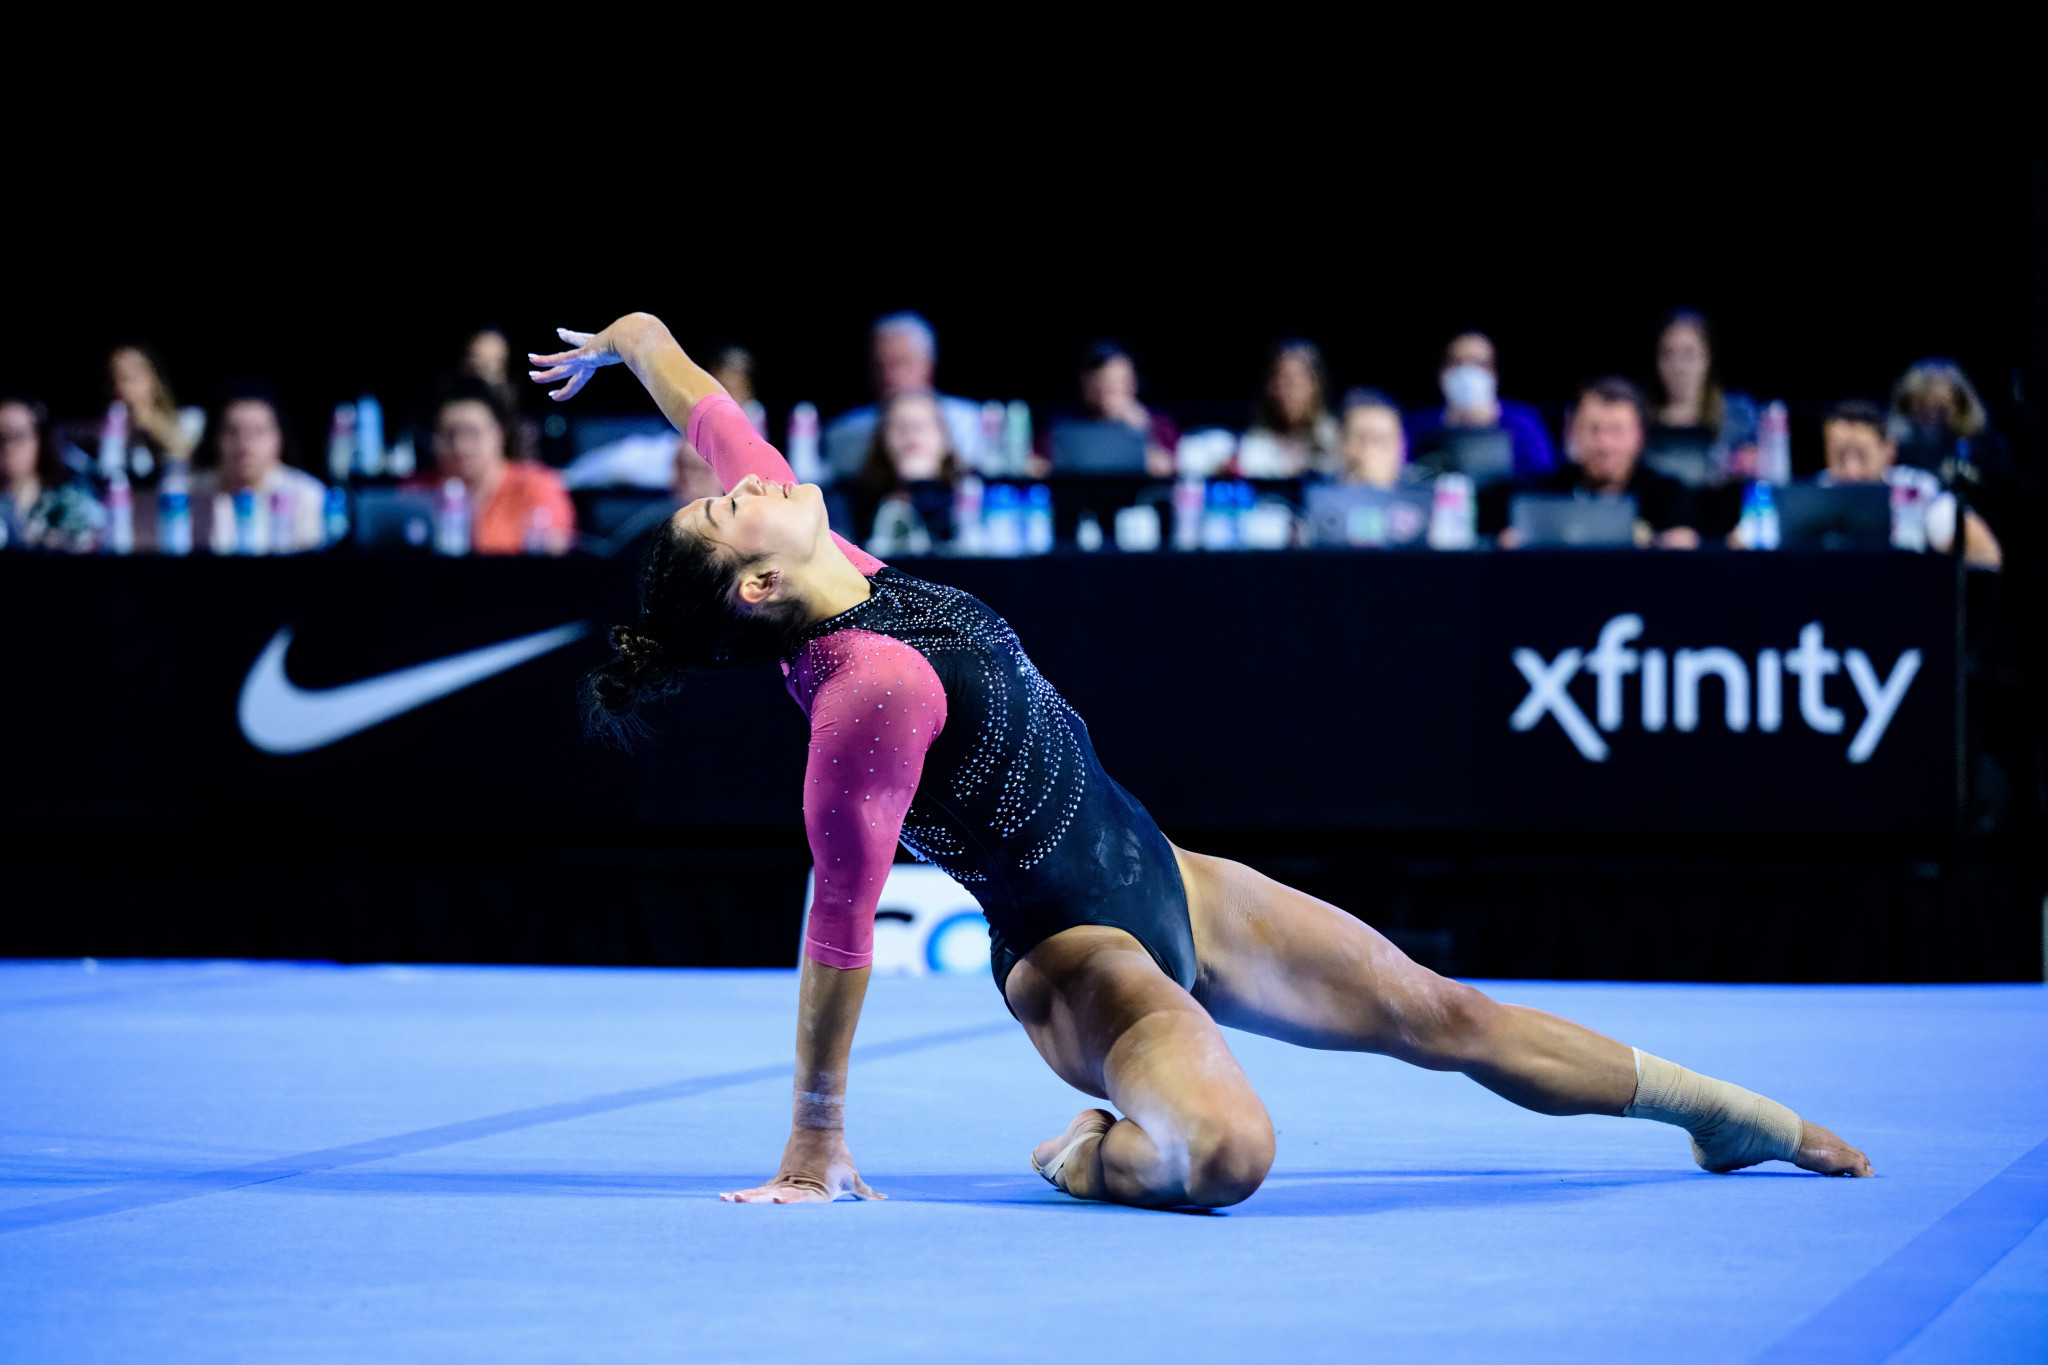 American gymnast Kayla DiCello in action ©Xfinity